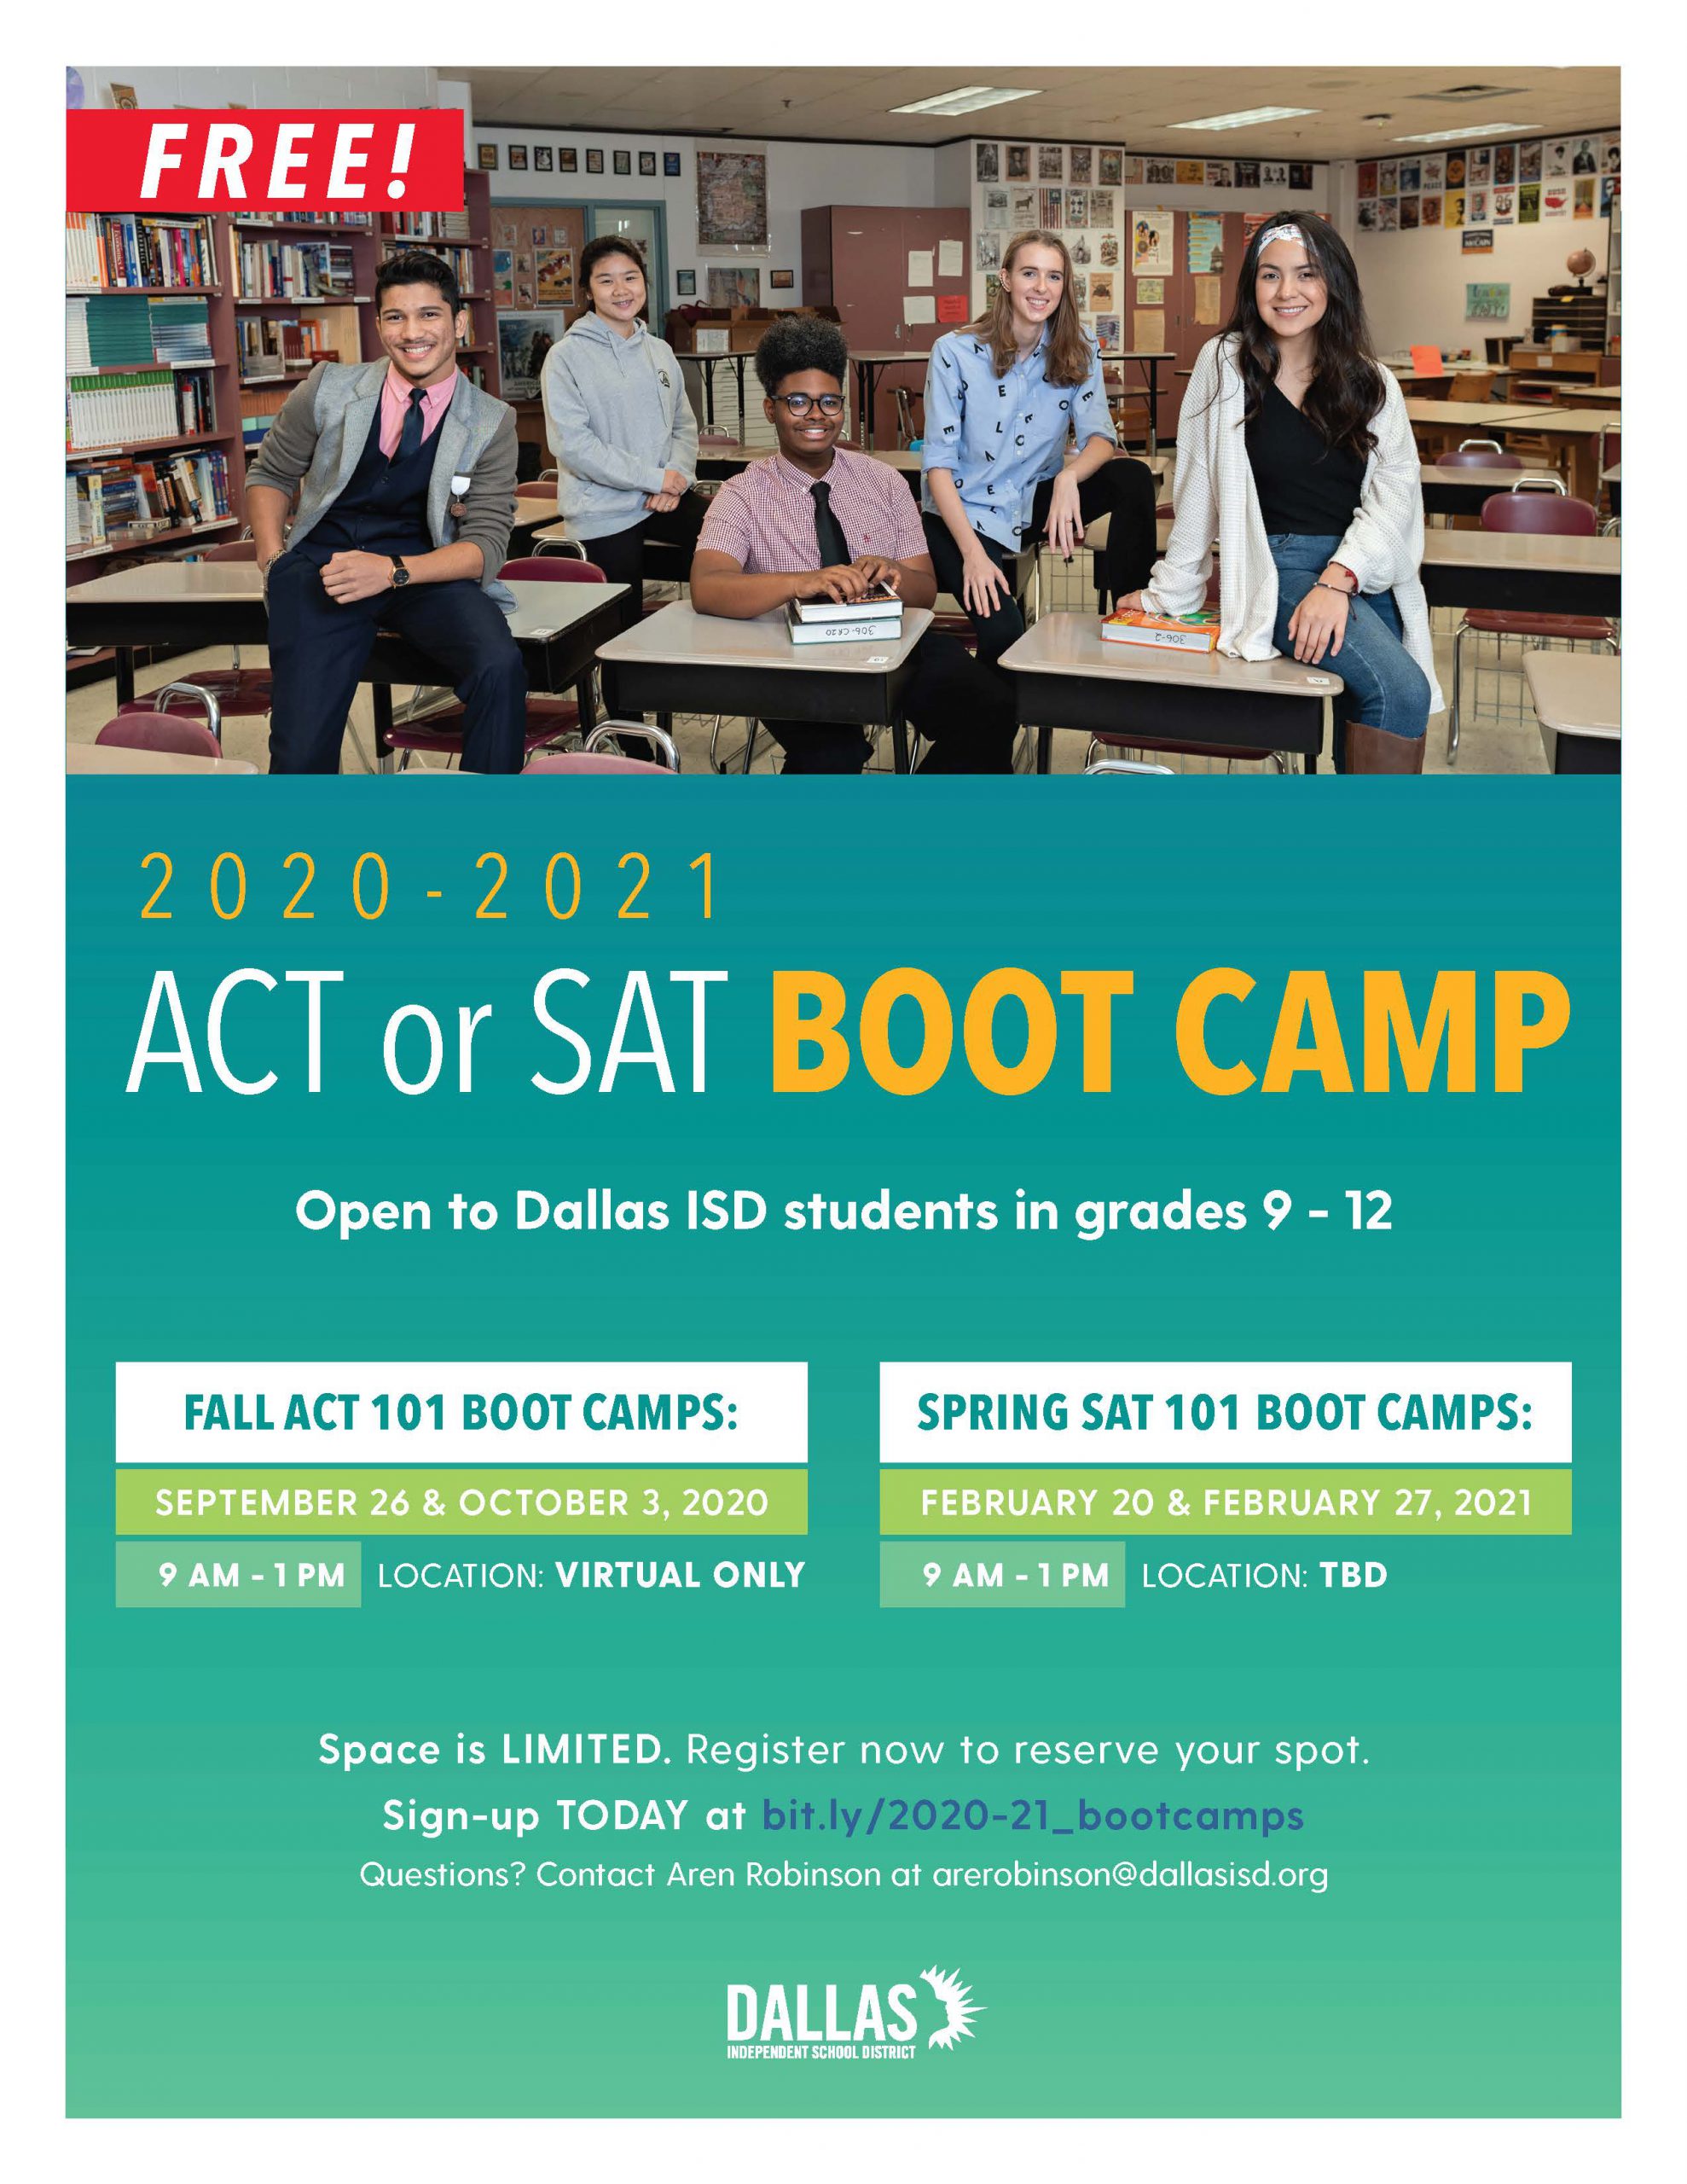 Dallas ISD high school students invited to register for free ACT and SAT boot camps